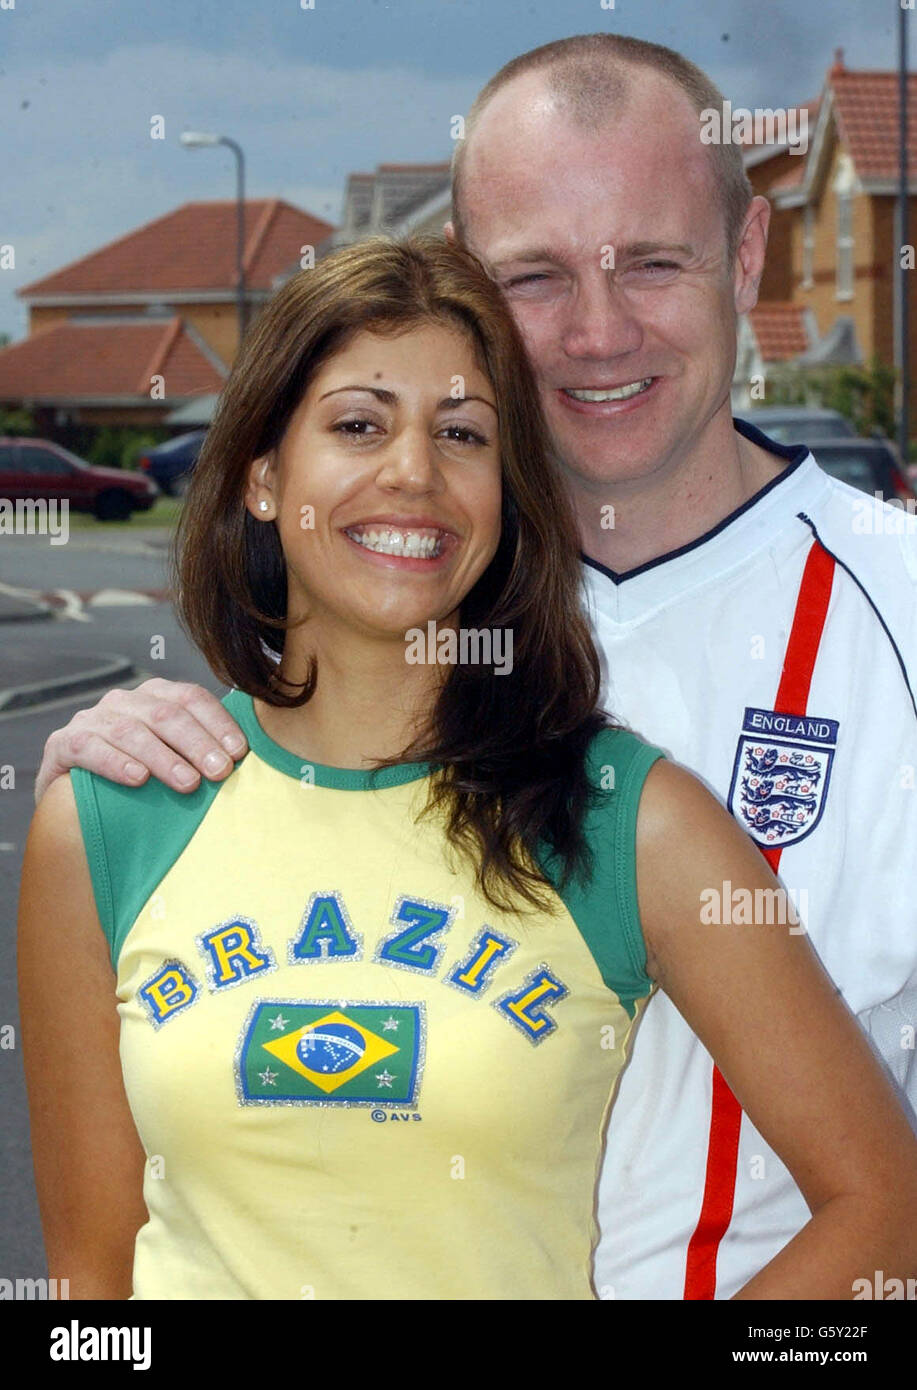 Englishman Gareth Godwin, 36, and Brazilian Paula McGrory, 26, who are marrying Friday just hours after the England v Brazil World Cup quarter-final. * The couple, from Ingleby Barwick, near Stockton, Teesside, booked their wedding more than a year ago when not a thought was given to the World Cup. Stock Photo